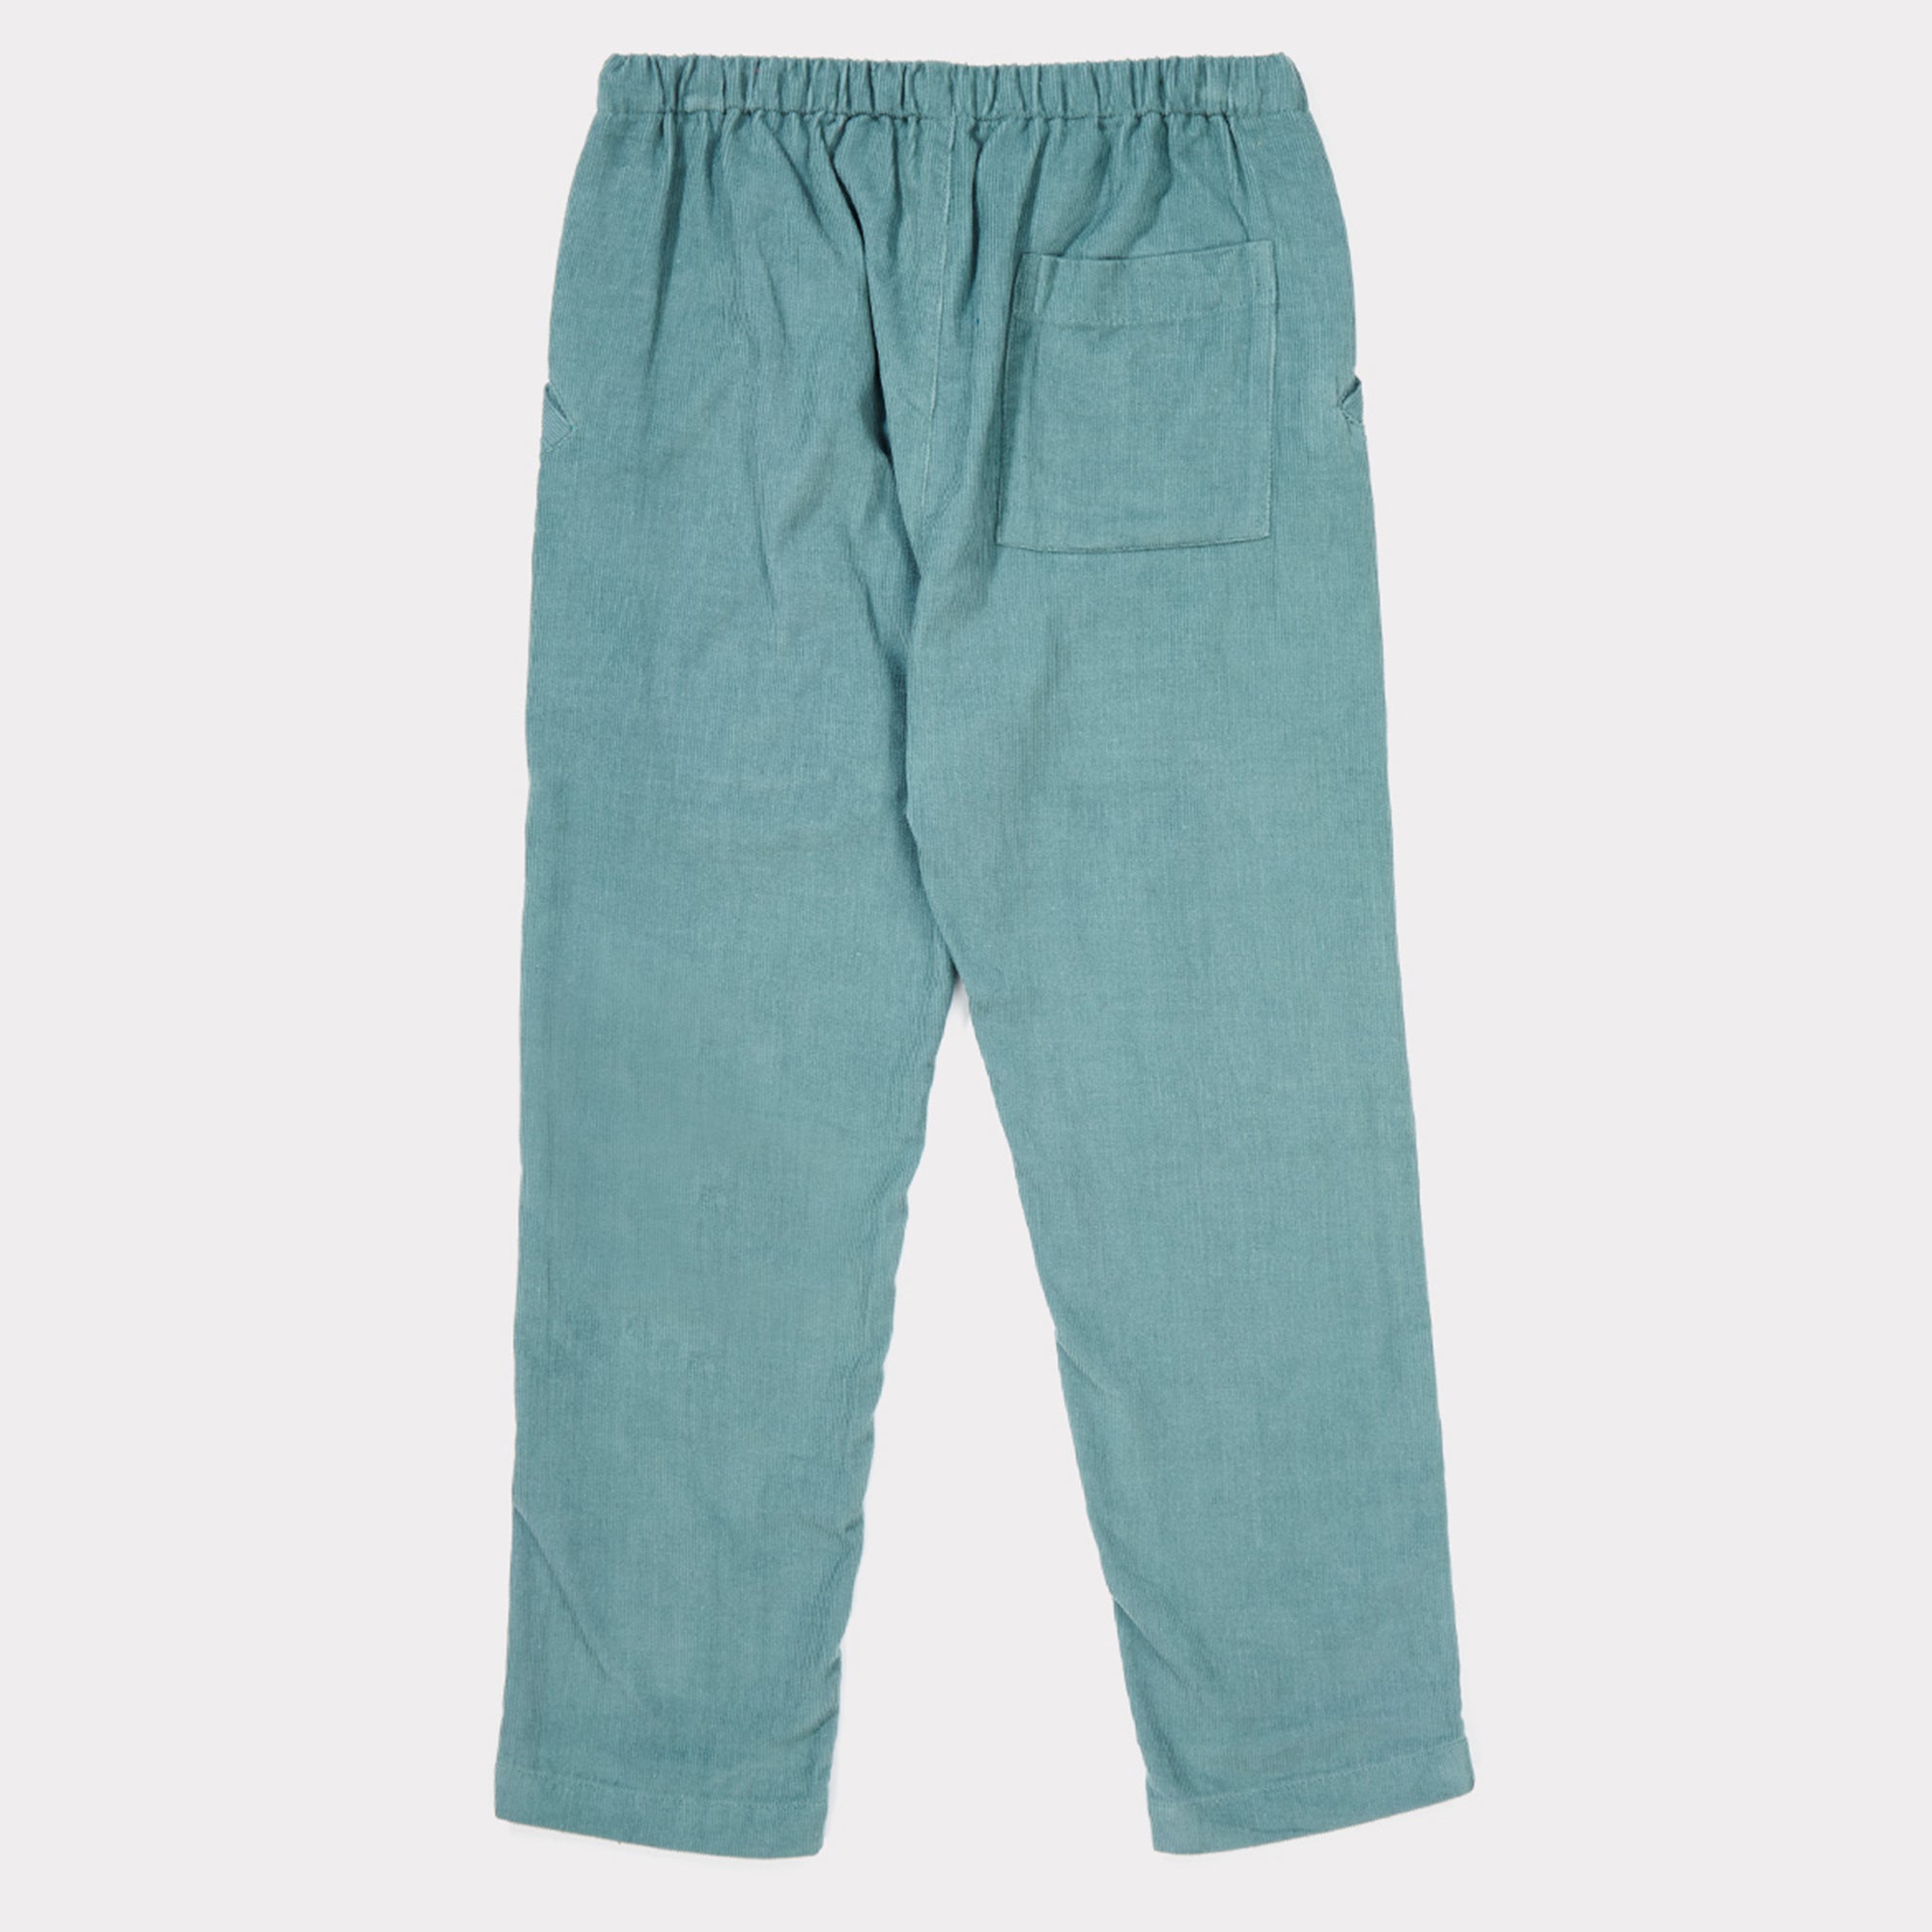 Boys & Girls Cameo Blue Cotton Trousers